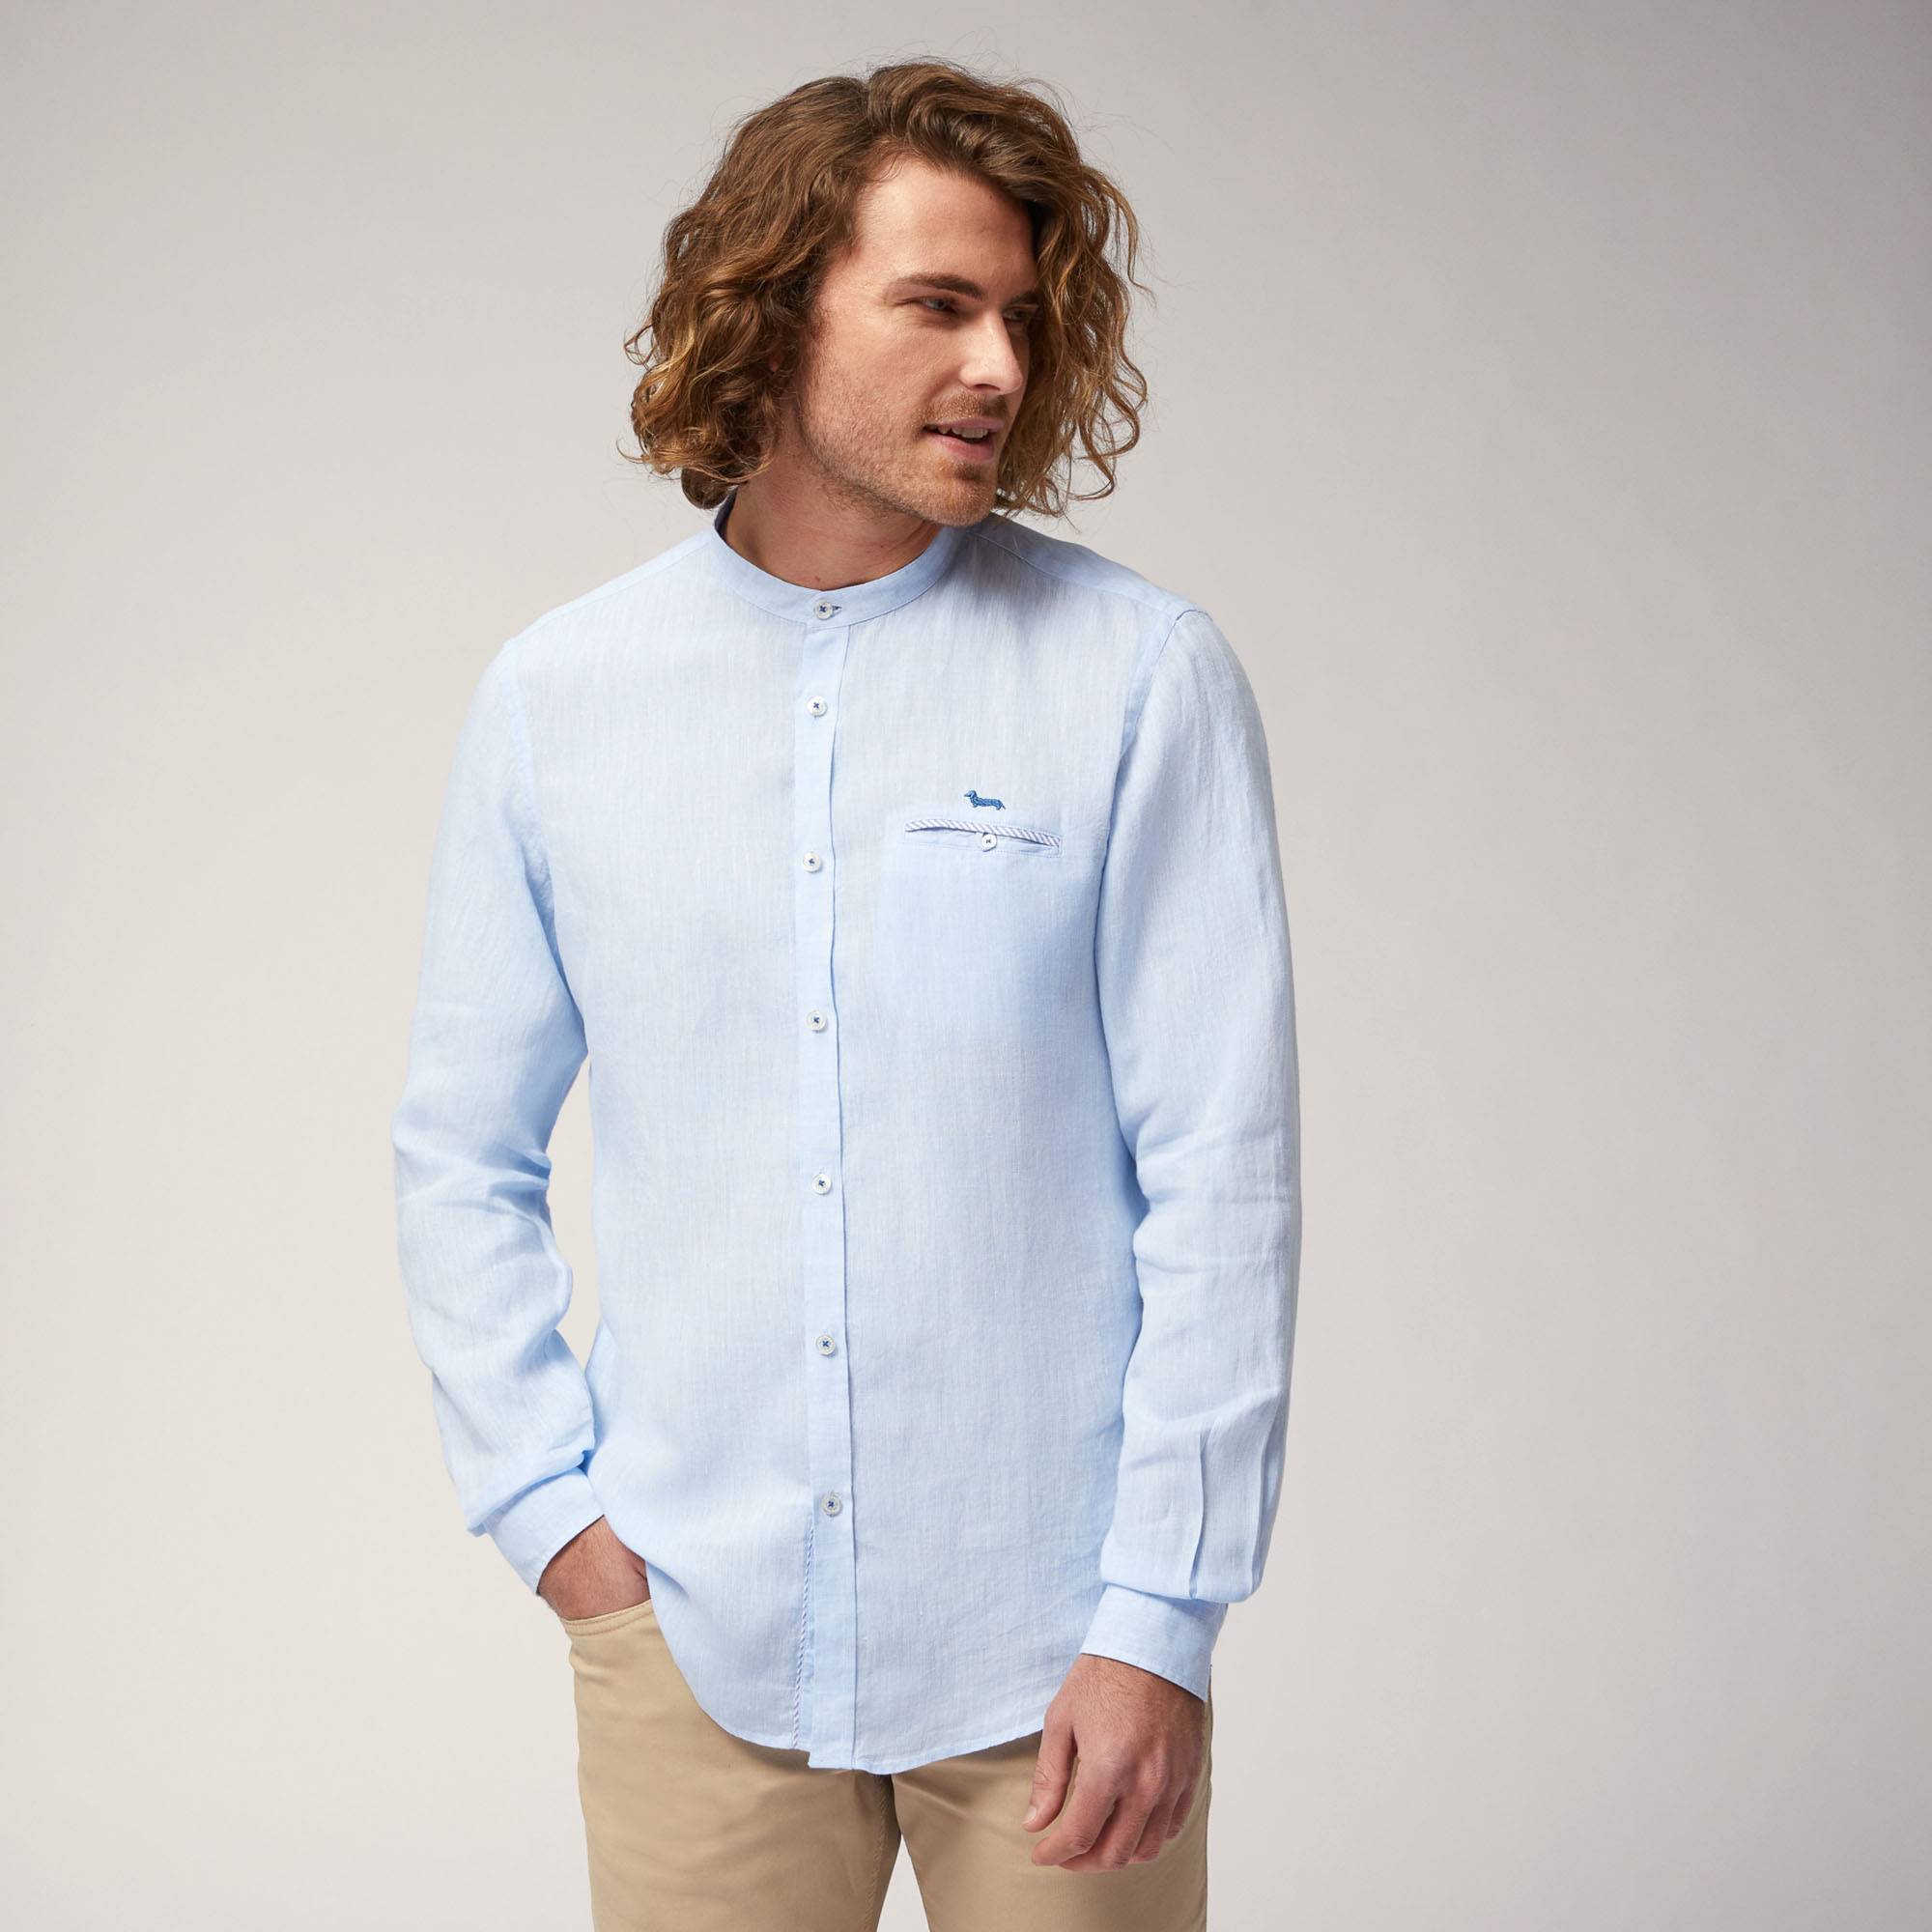 Linen Shirt with Mandarin Collar and Breast Pocket, Sky Blue, large